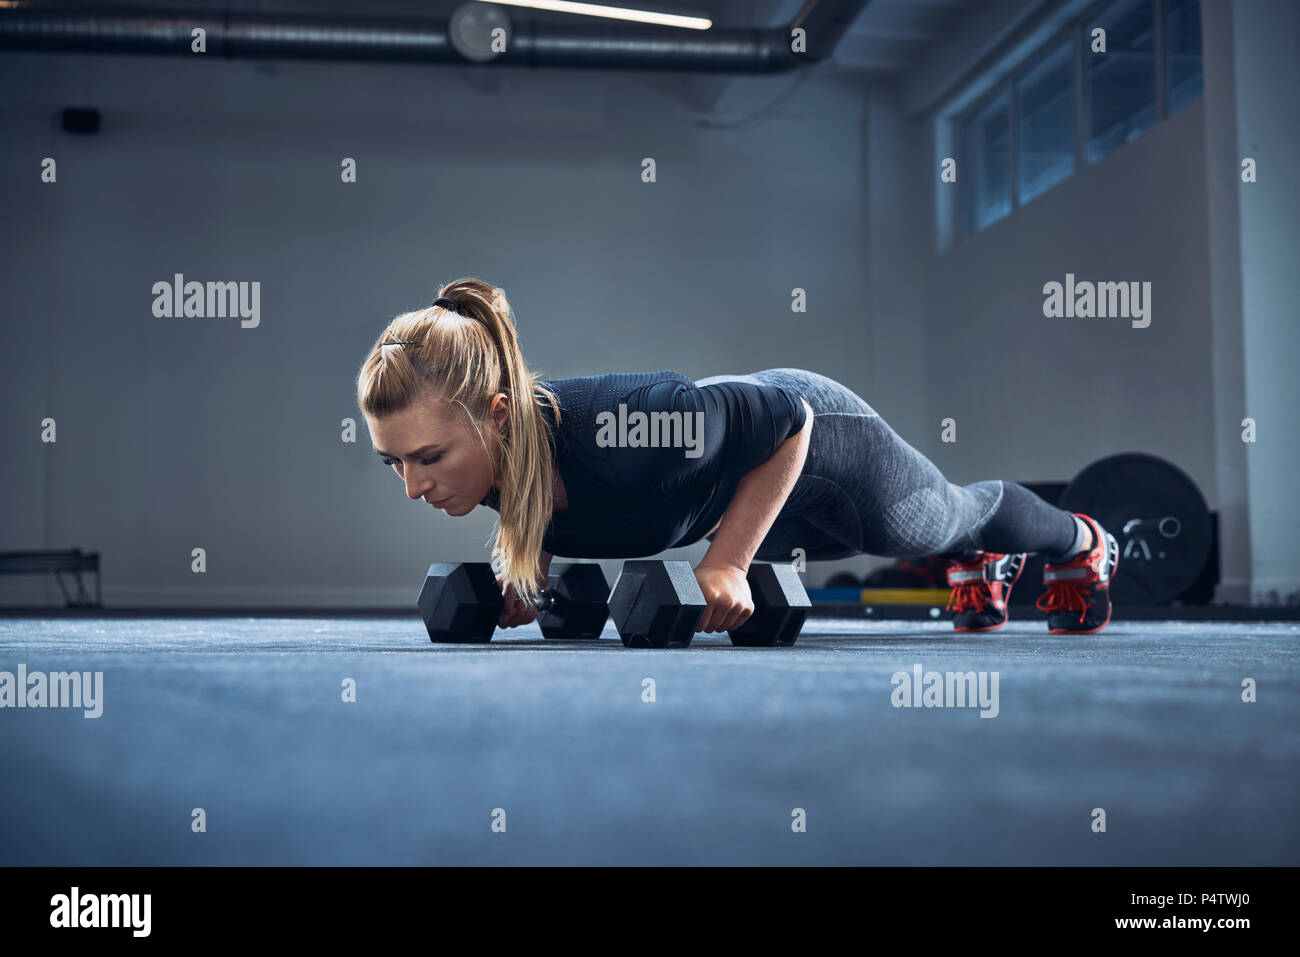 Woman practicing dumbbell push-up exercise at gym Stock Photo